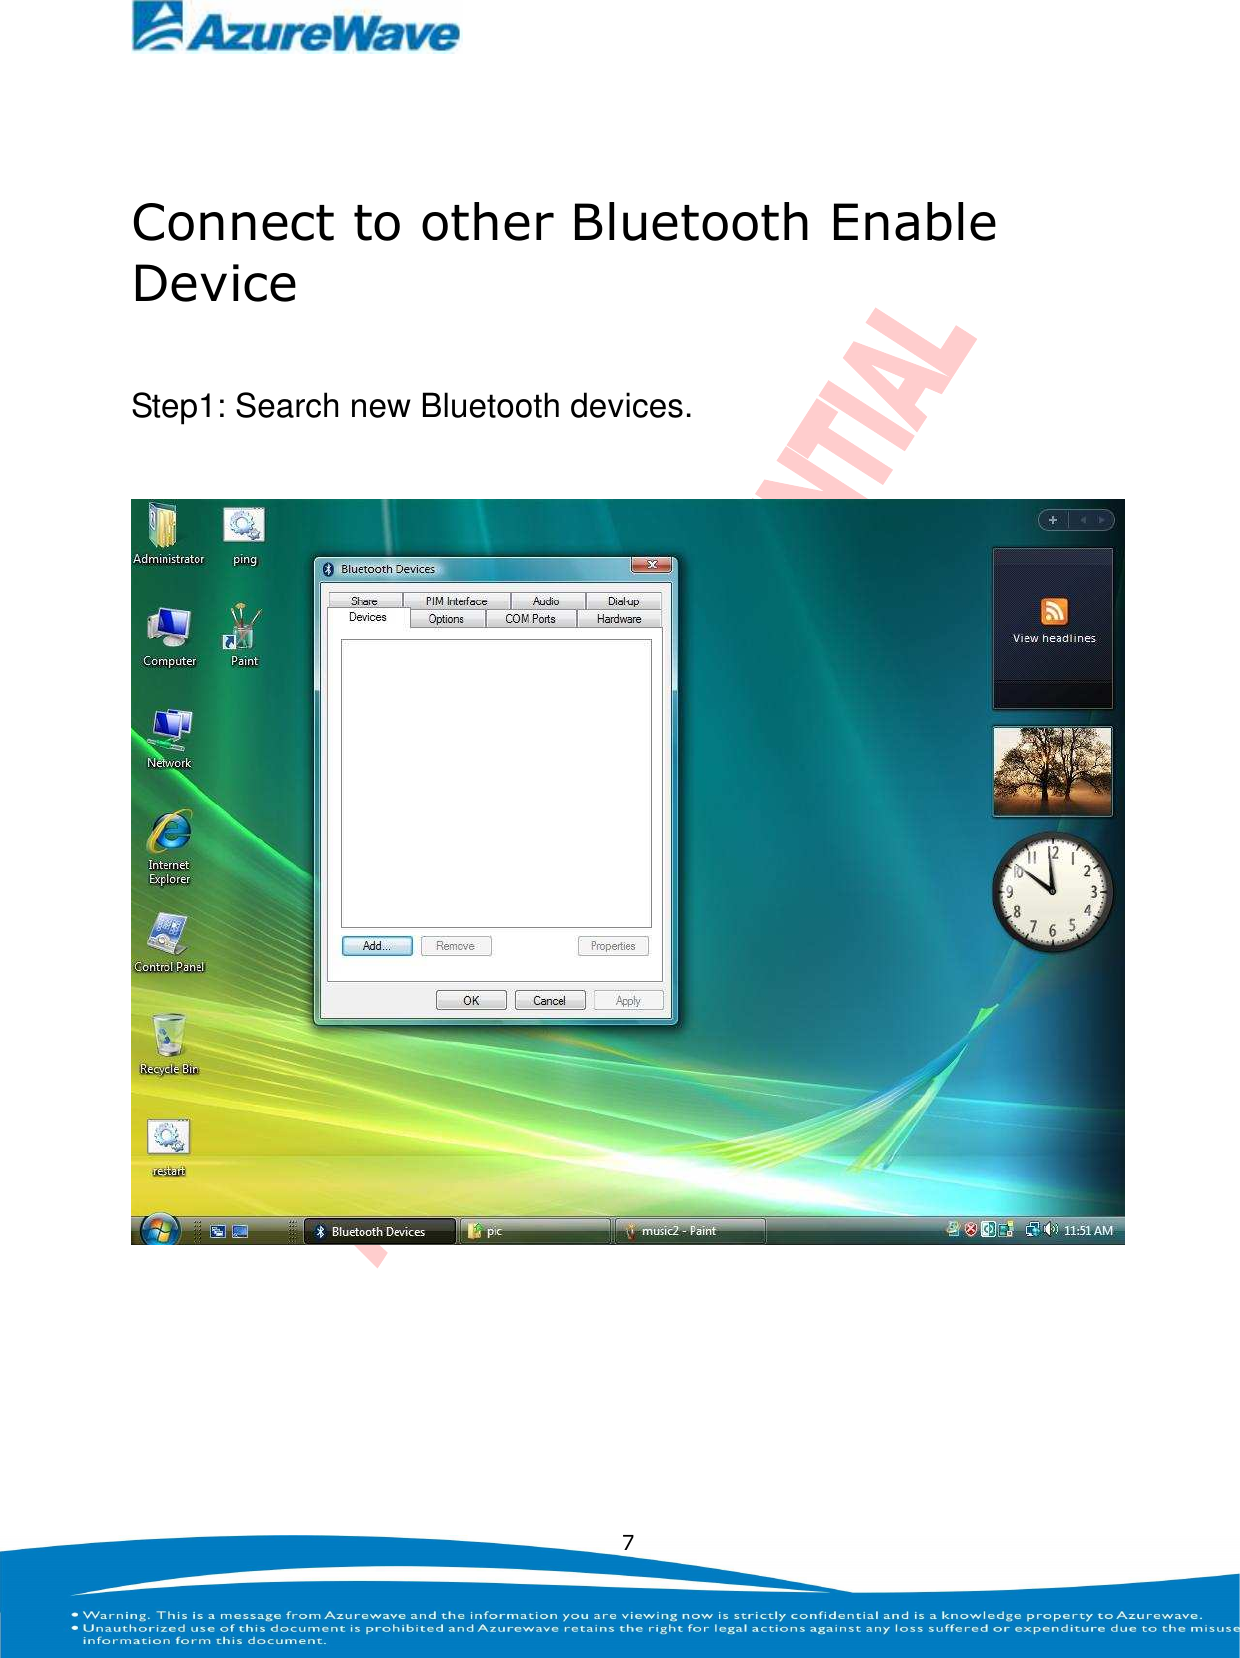    7  Connect to other Bluetooth Enable Device Step1: Search new Bluetooth devices.      